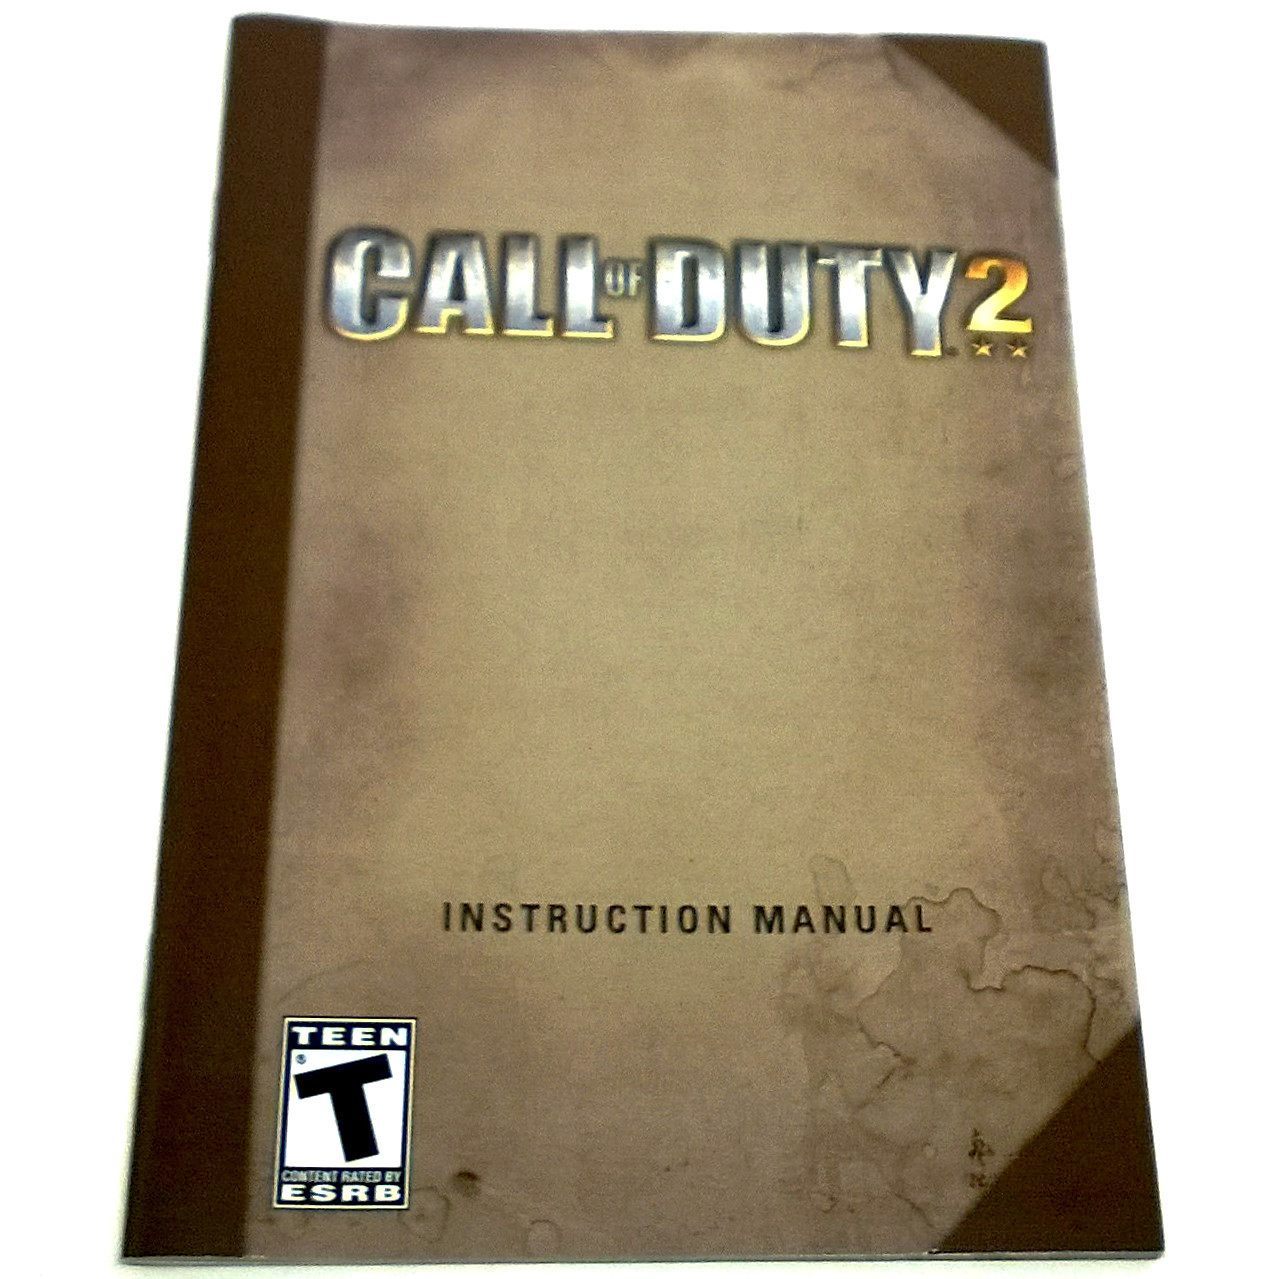 Call of Duty 2 for PC CD-ROM - Front of manual